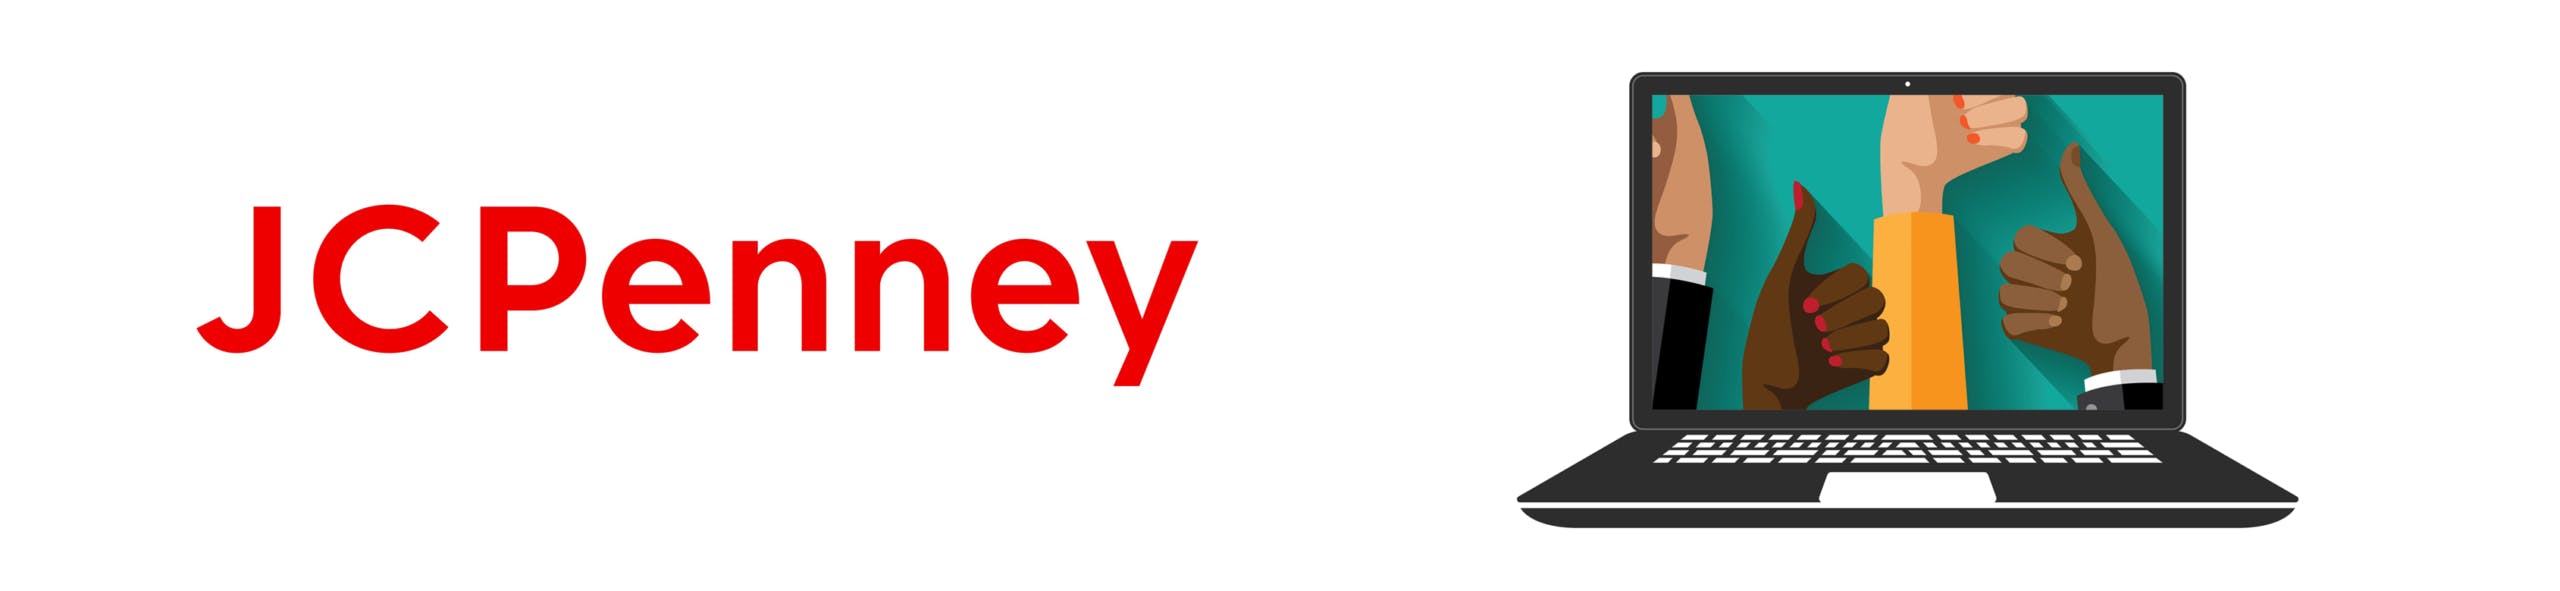 JCPenney logo next to a laptop with thumbs pointing up